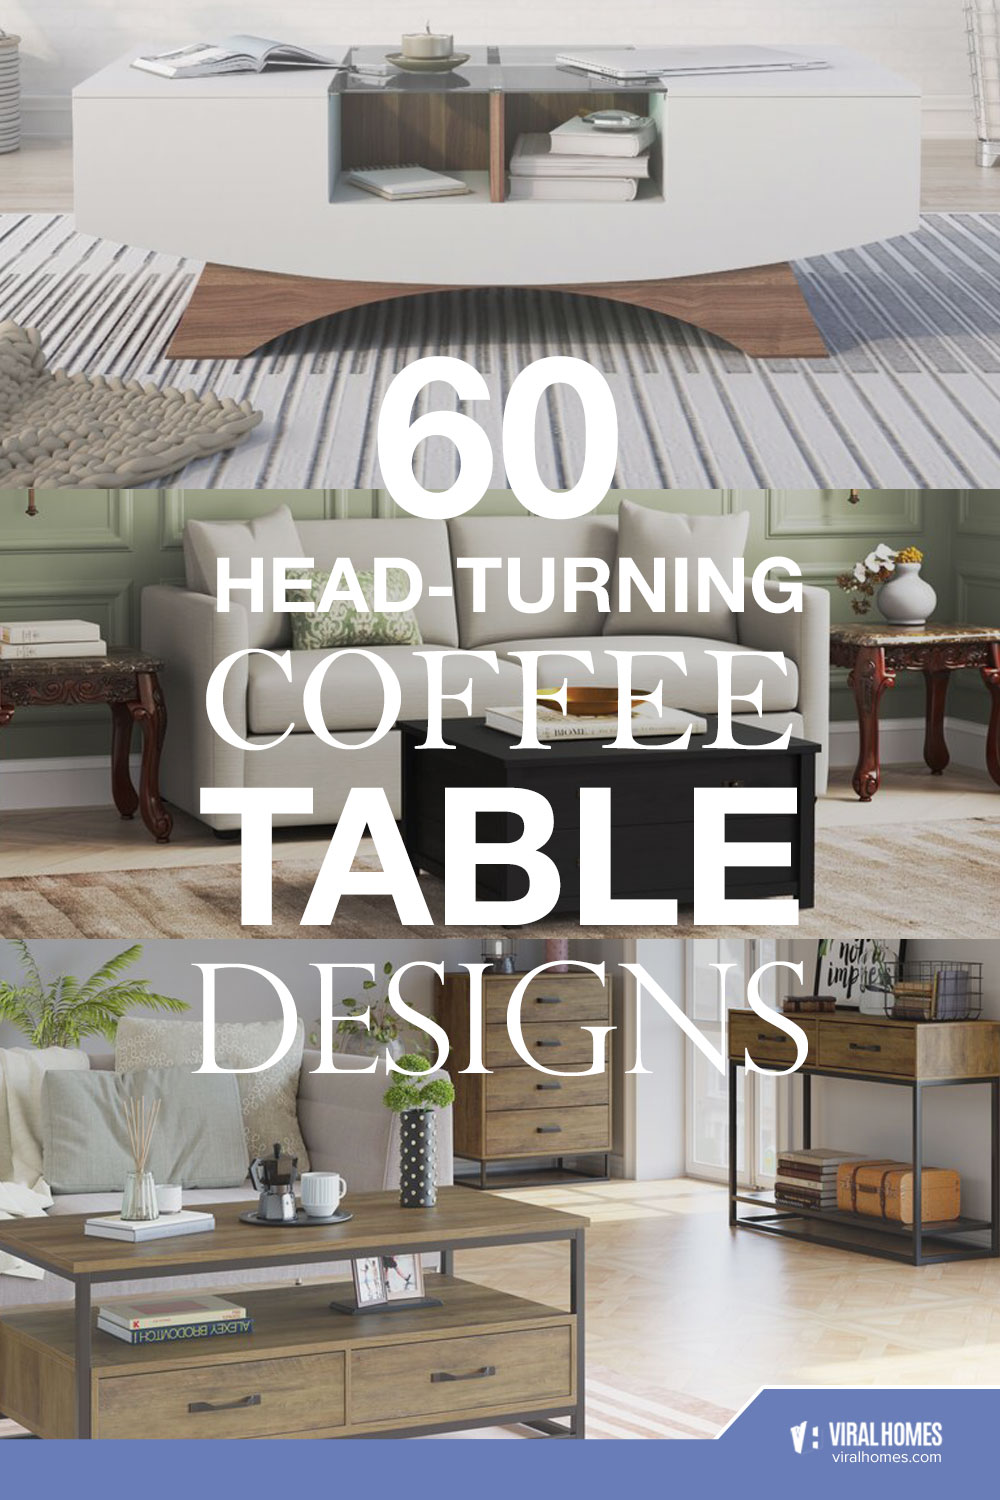 Head-Turning Coffee Table Designs for a Charismatic Living Room